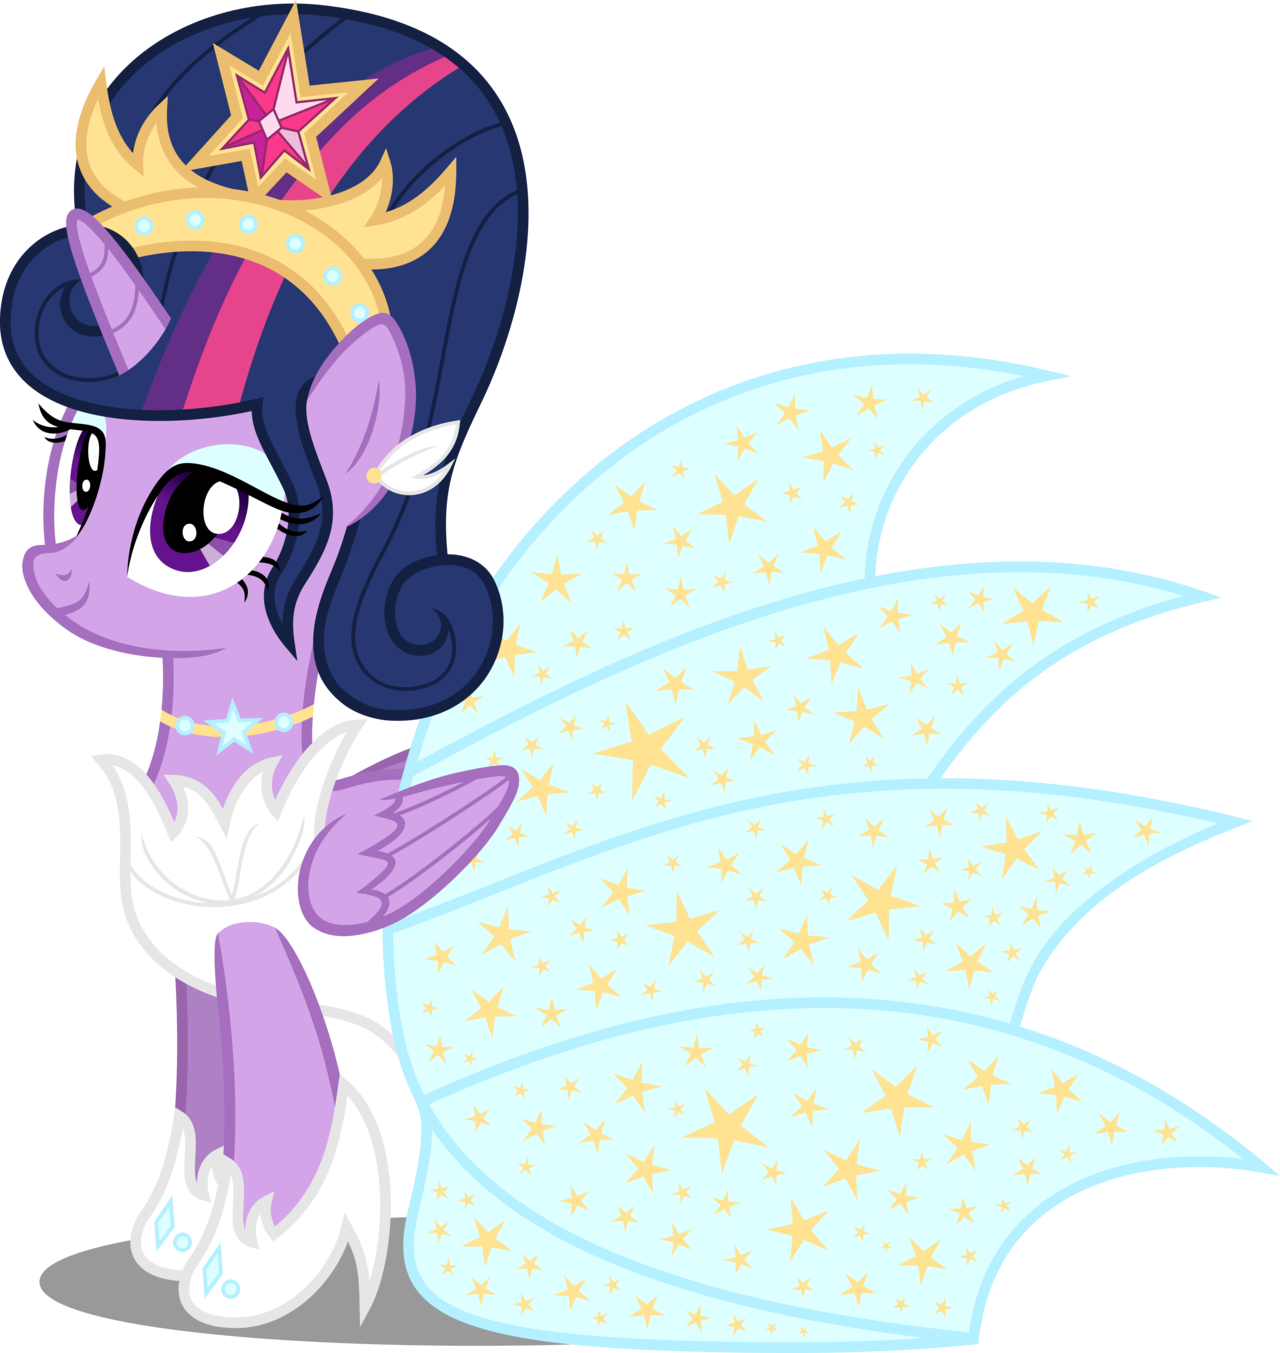 Princess Twilight Sparkle By Atomicmillennial Princess - Princess Twilight Sparkle Dress (1280x1353)